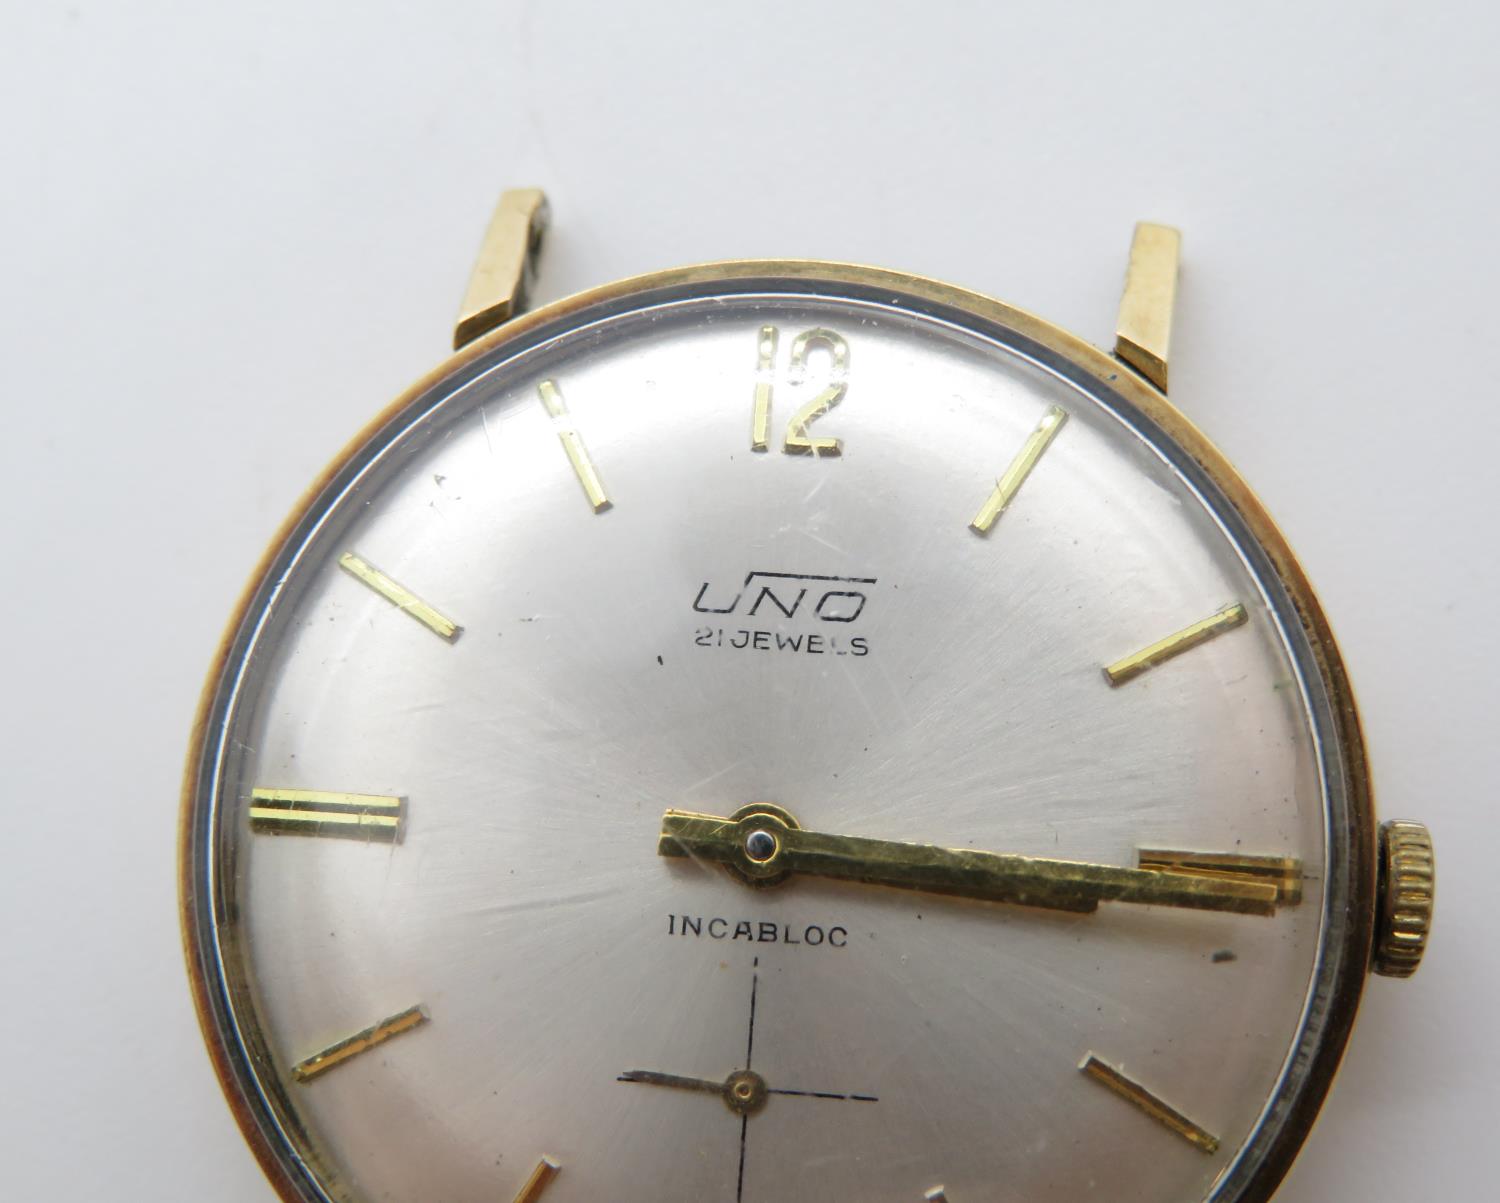 UNO 21 jewels Incabloc 9ct gold watch 34mm dial overall weight 20.5g - watch runs - Image 3 of 3